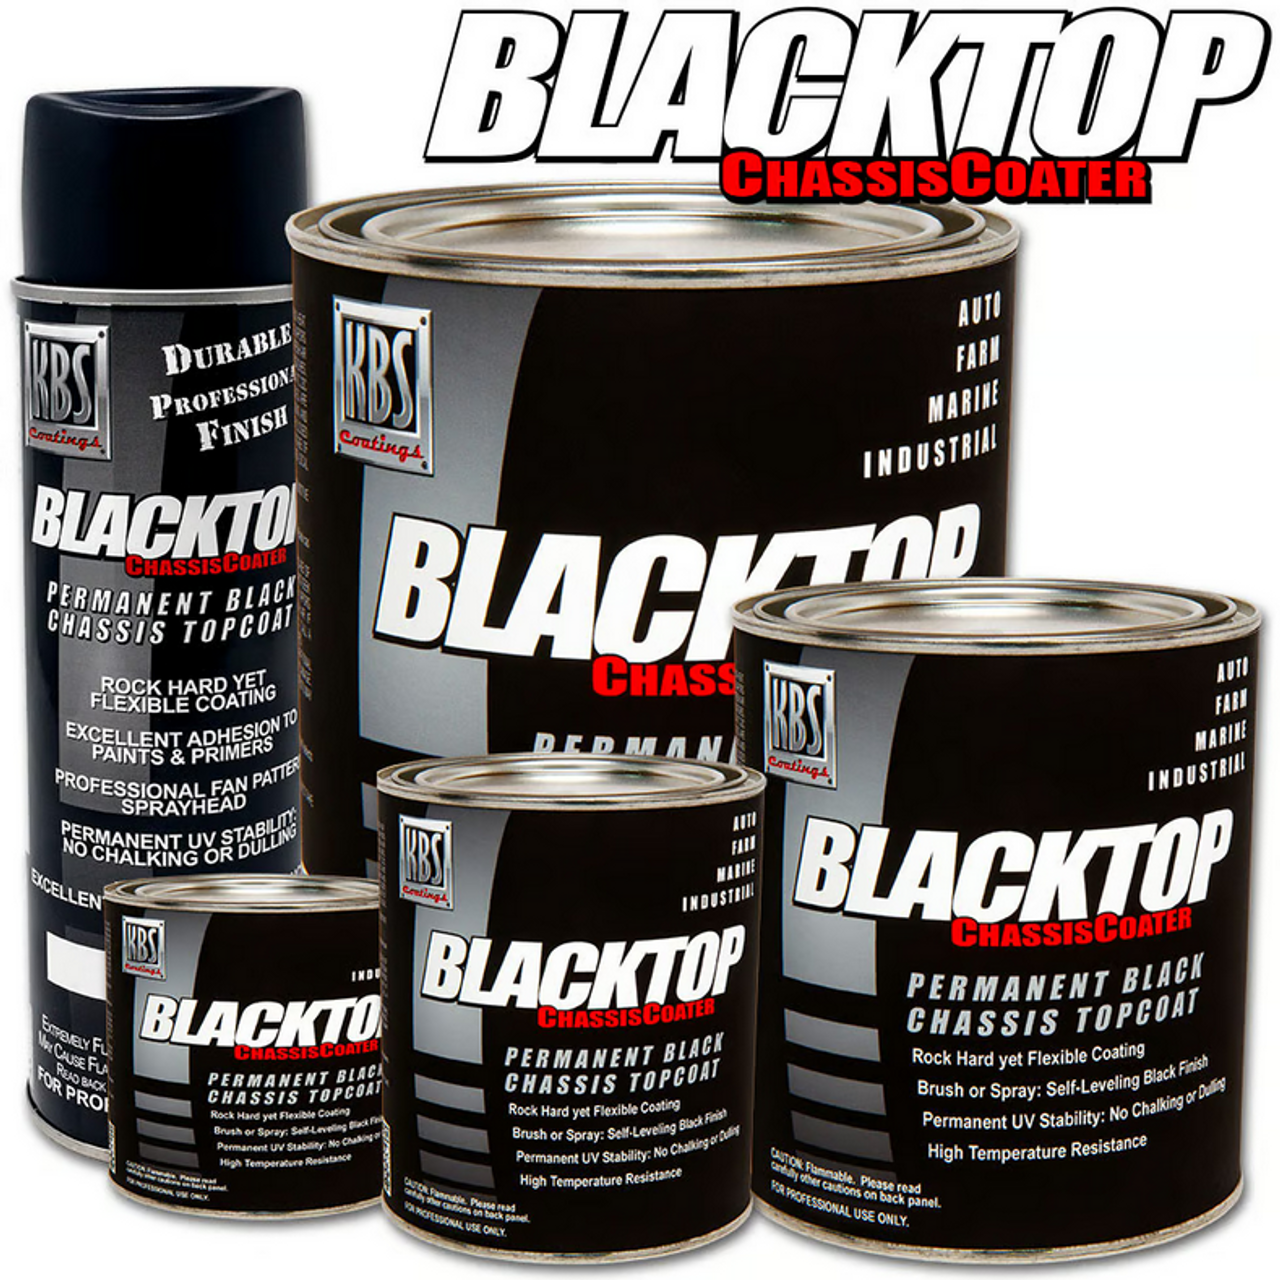 BlackTop Chassis Coater - Permanent OEM Satin Black Chassis Topcoat - 128 oz. Gallon